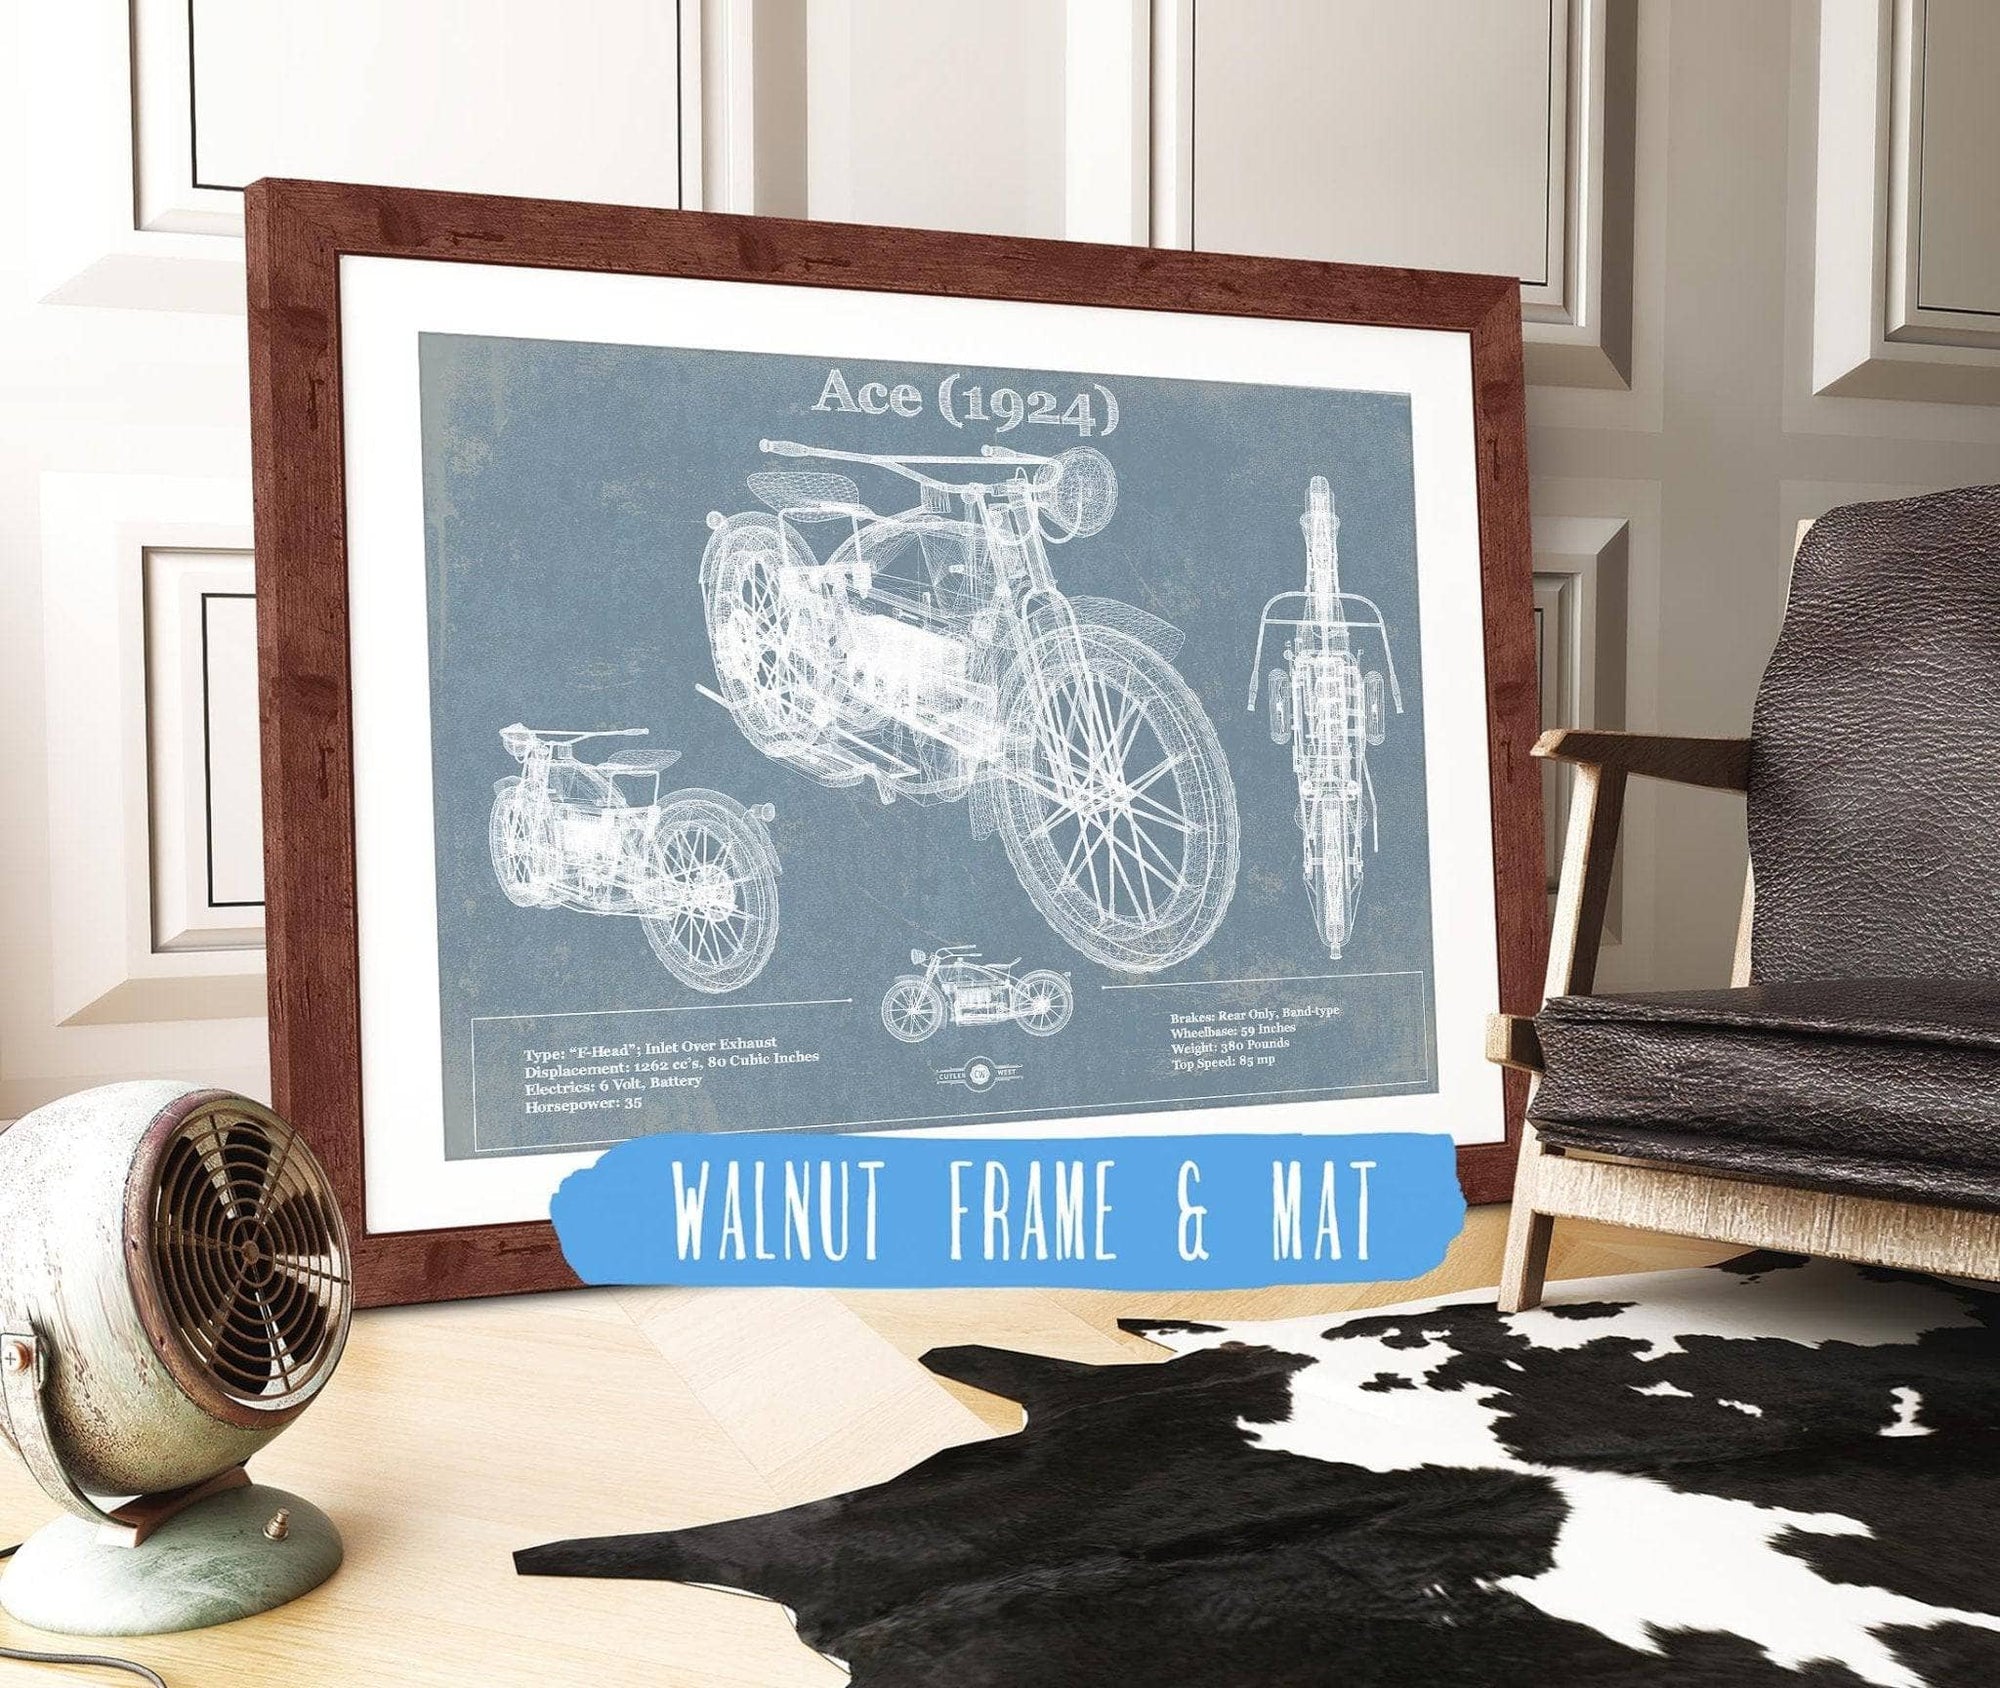 Cutler West Vehicle Collection 14" x 11" / Walnut Frame & Mat Ace (1924) Blueprint Motorcycle Patent Print 833110074_38907